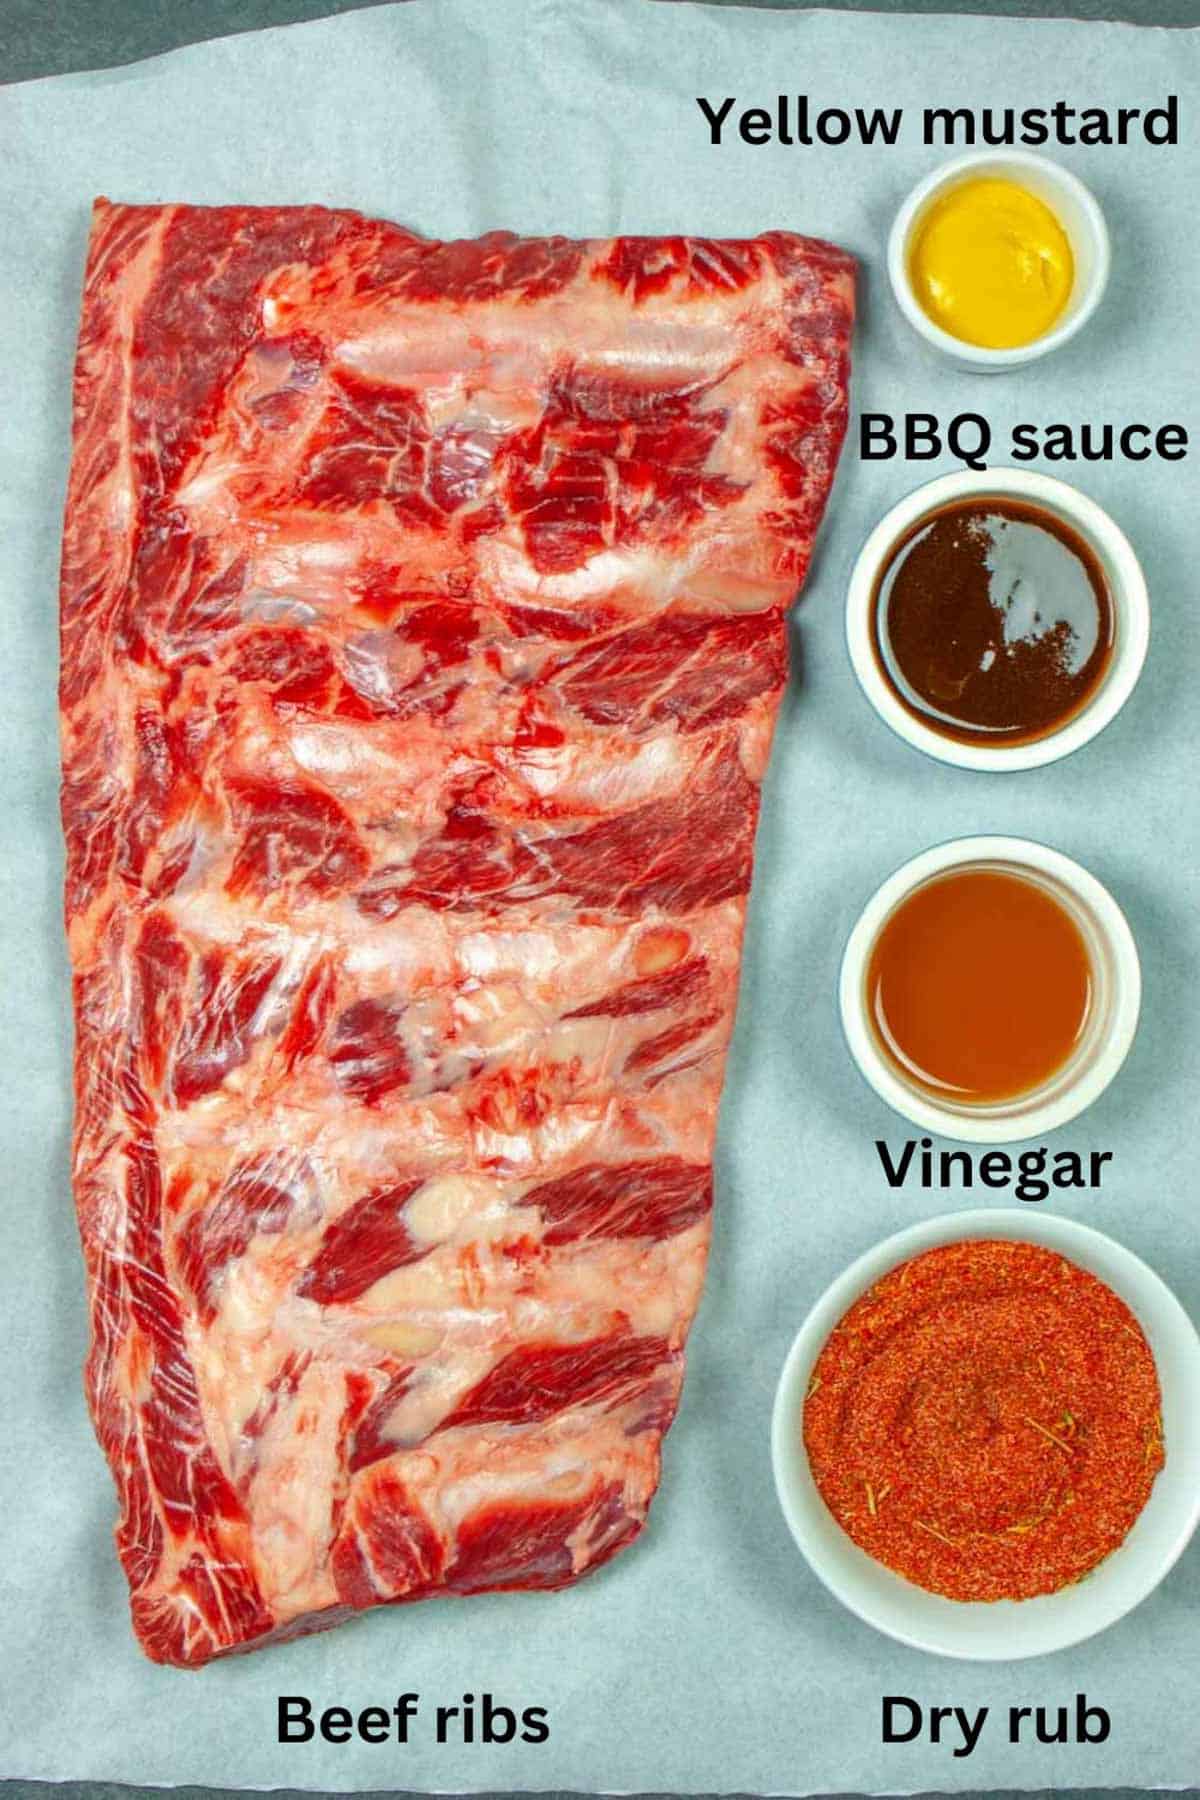 Ingredients for smoked ribs with labels.